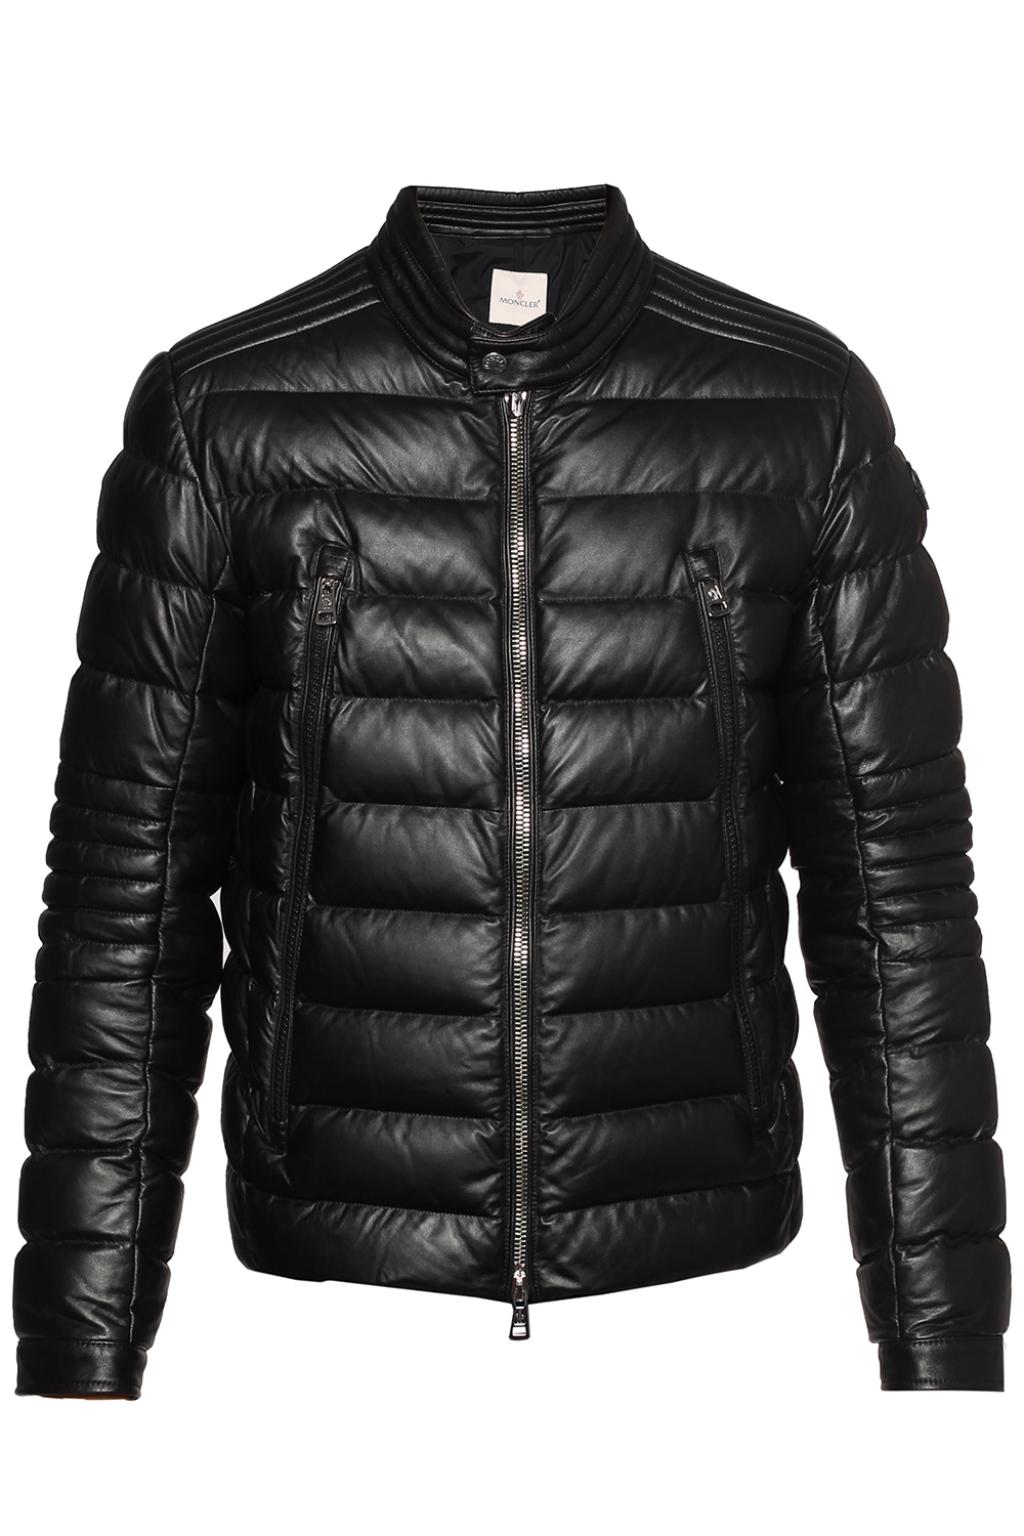 Moncler Leather Jacket Store, 46% OFF | www.ilpungolo.org